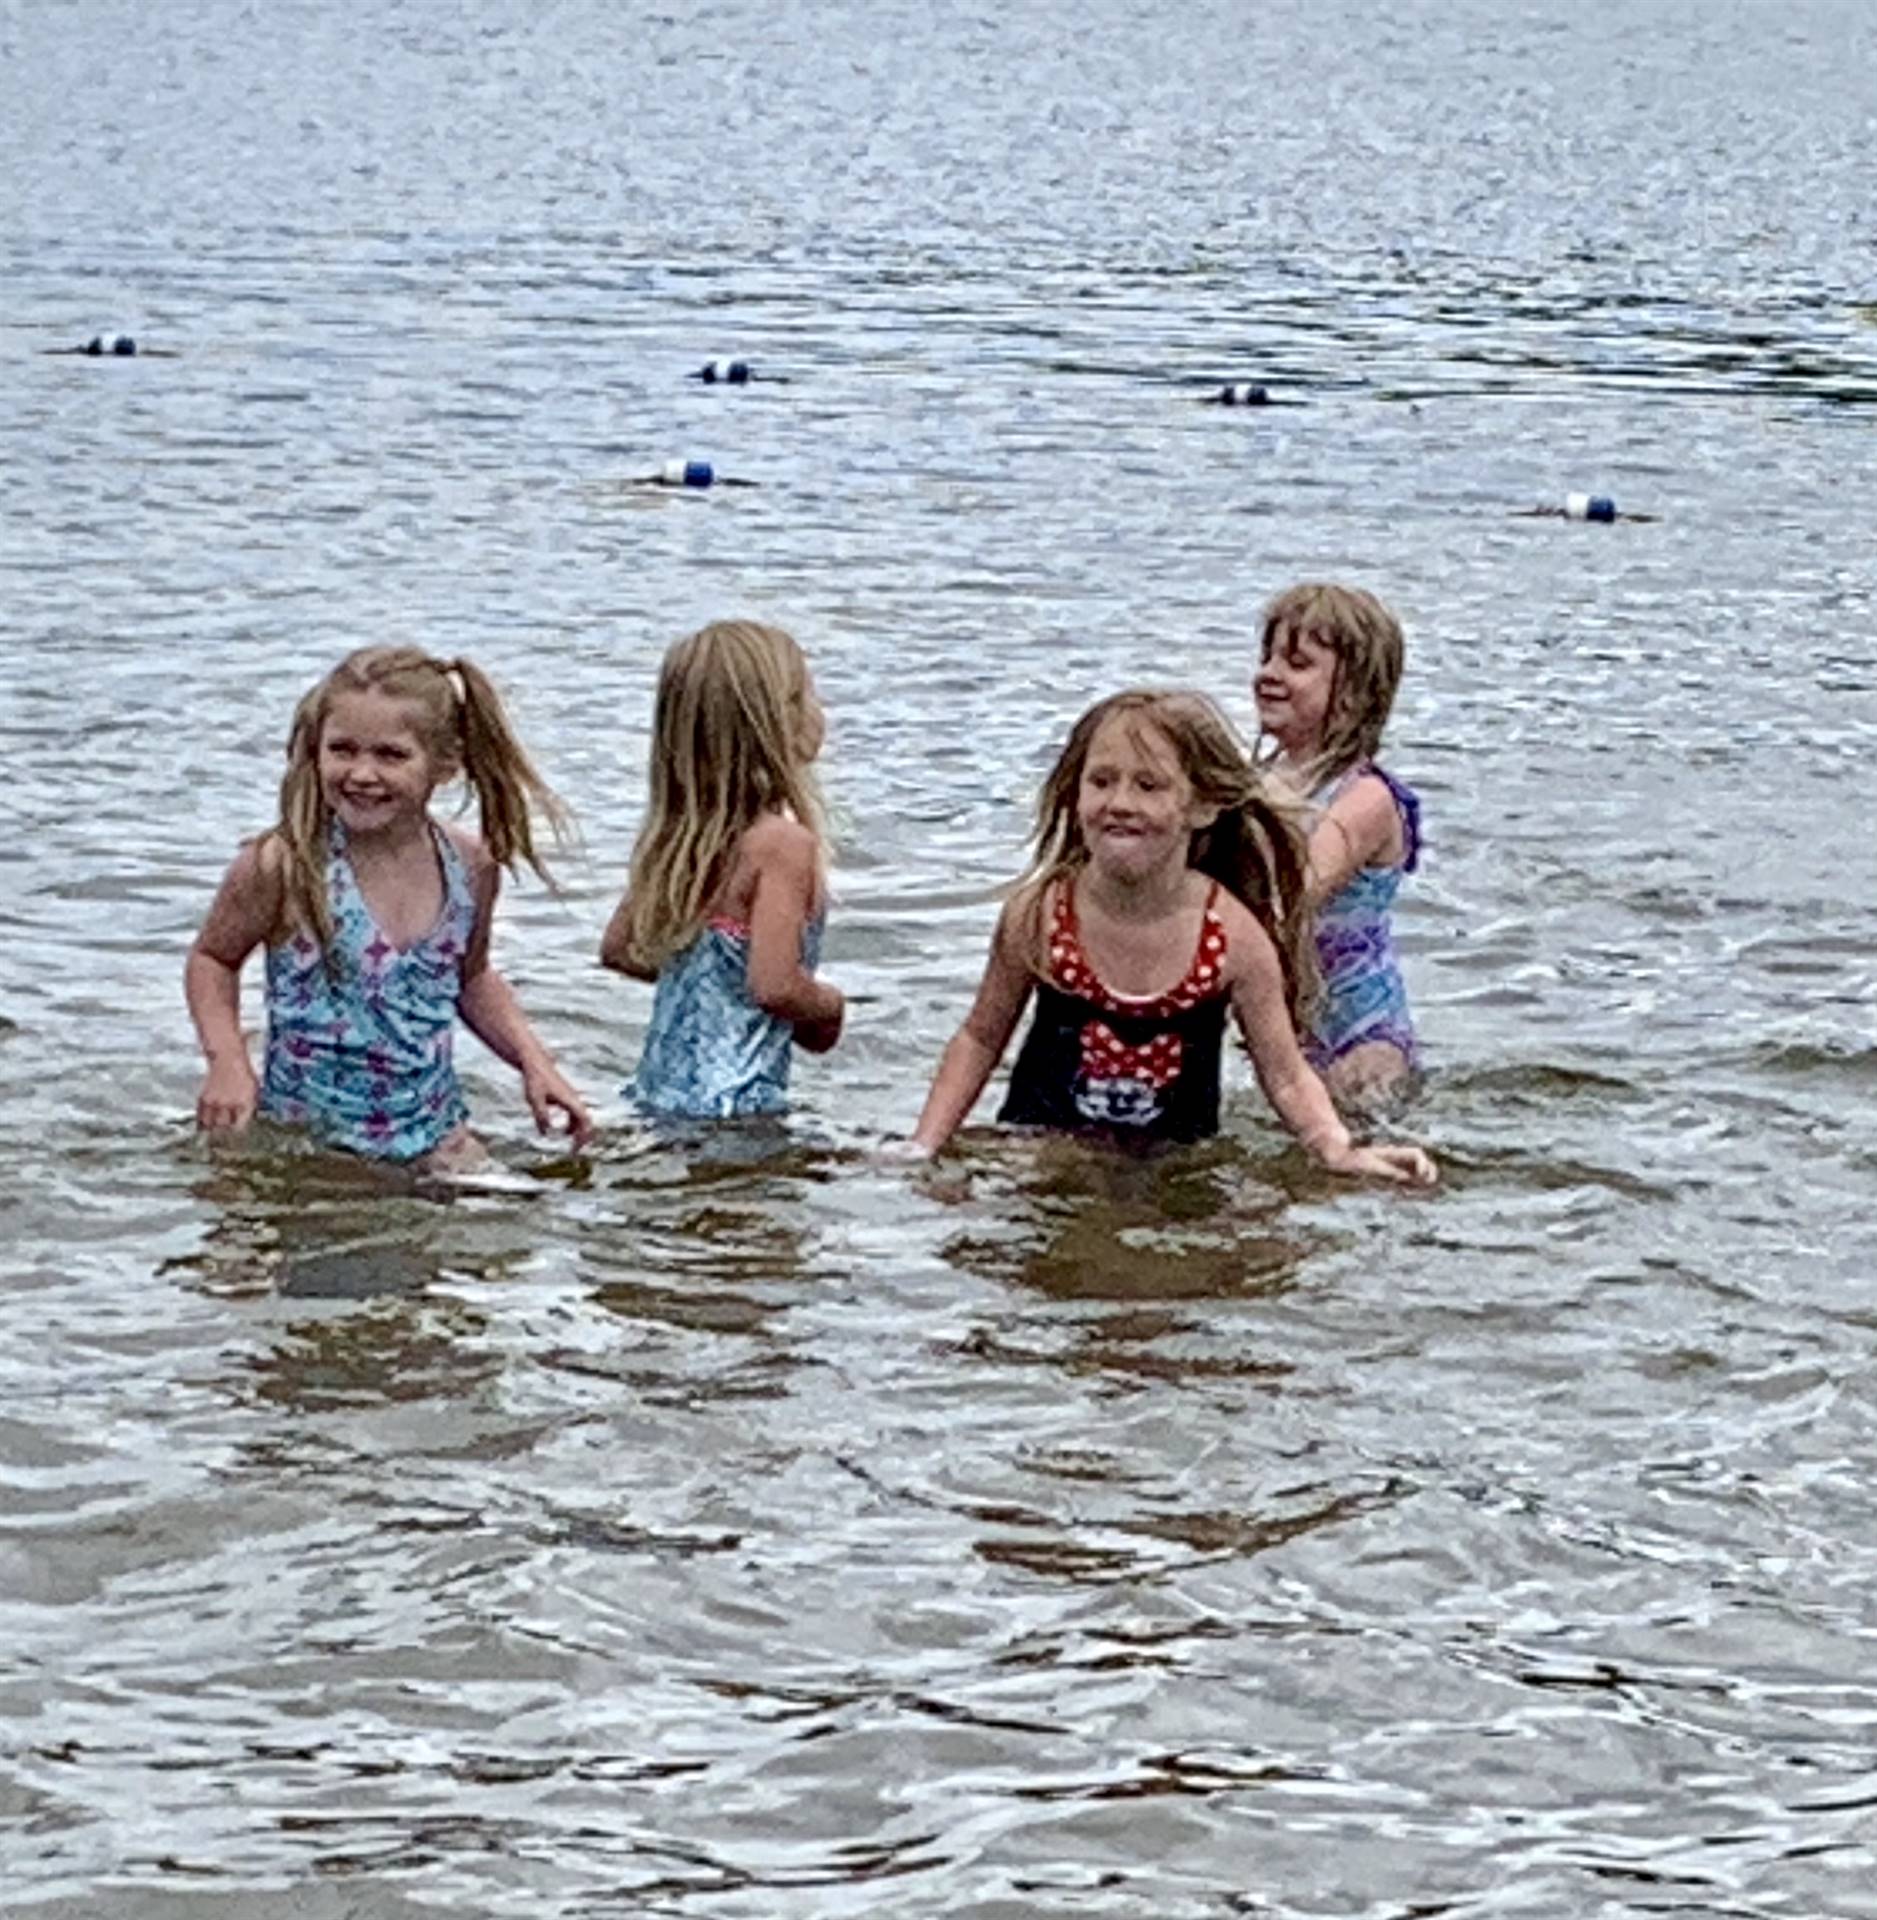 4 students in water.